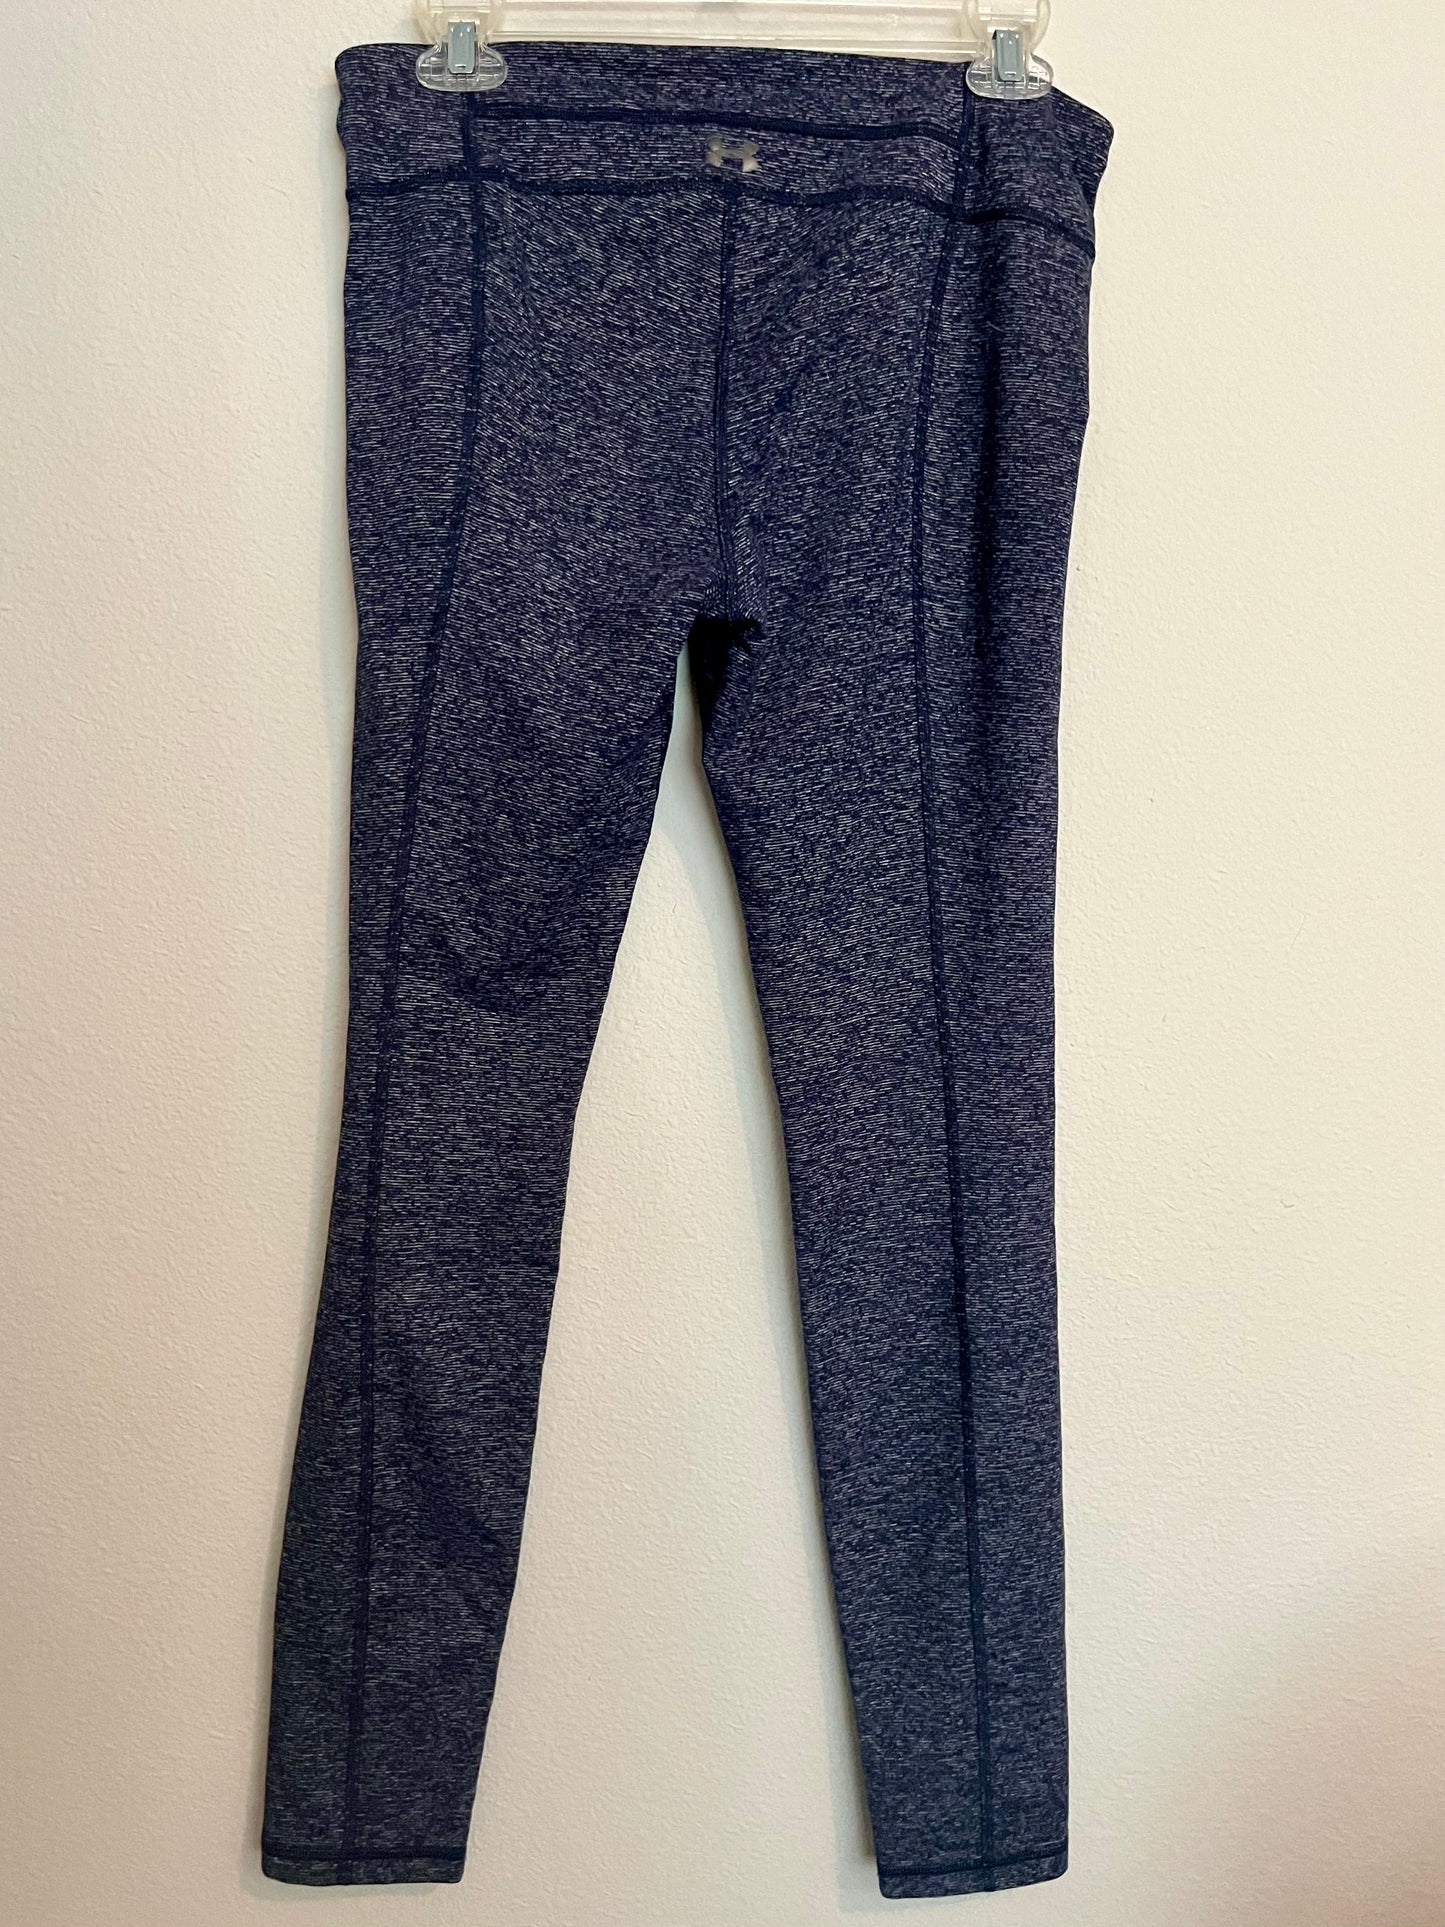 Under Armour Leggings, Size Medium - Tales from the Tangle